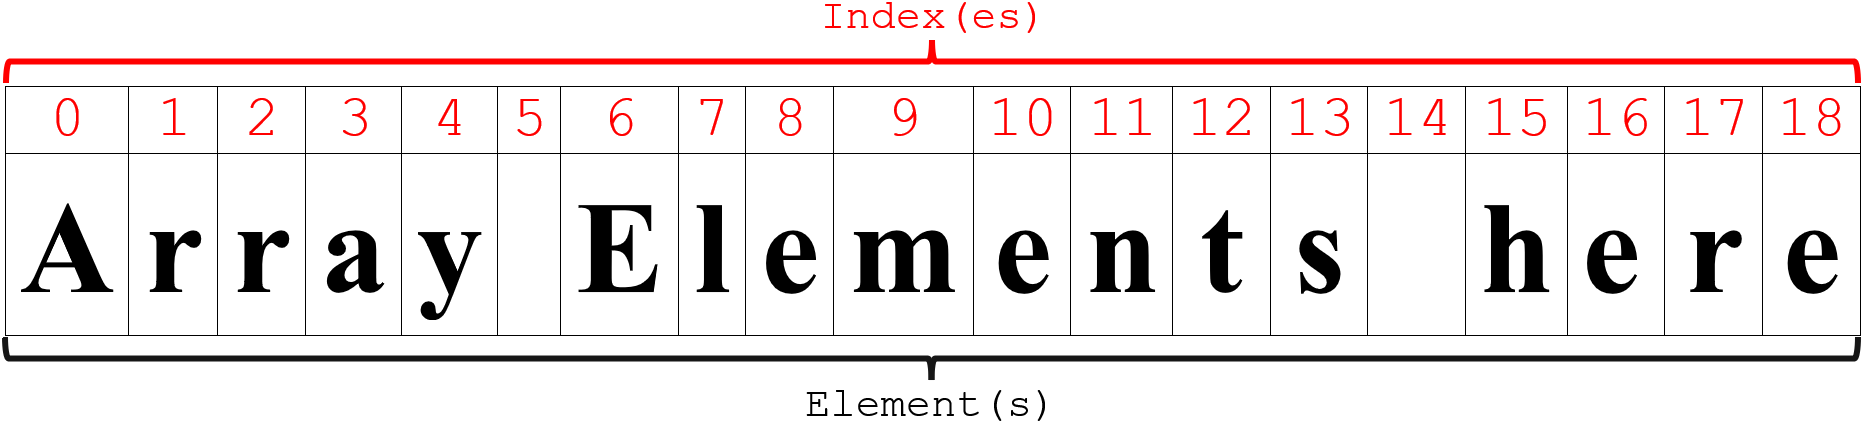 array structure with its content(s) and index(es)